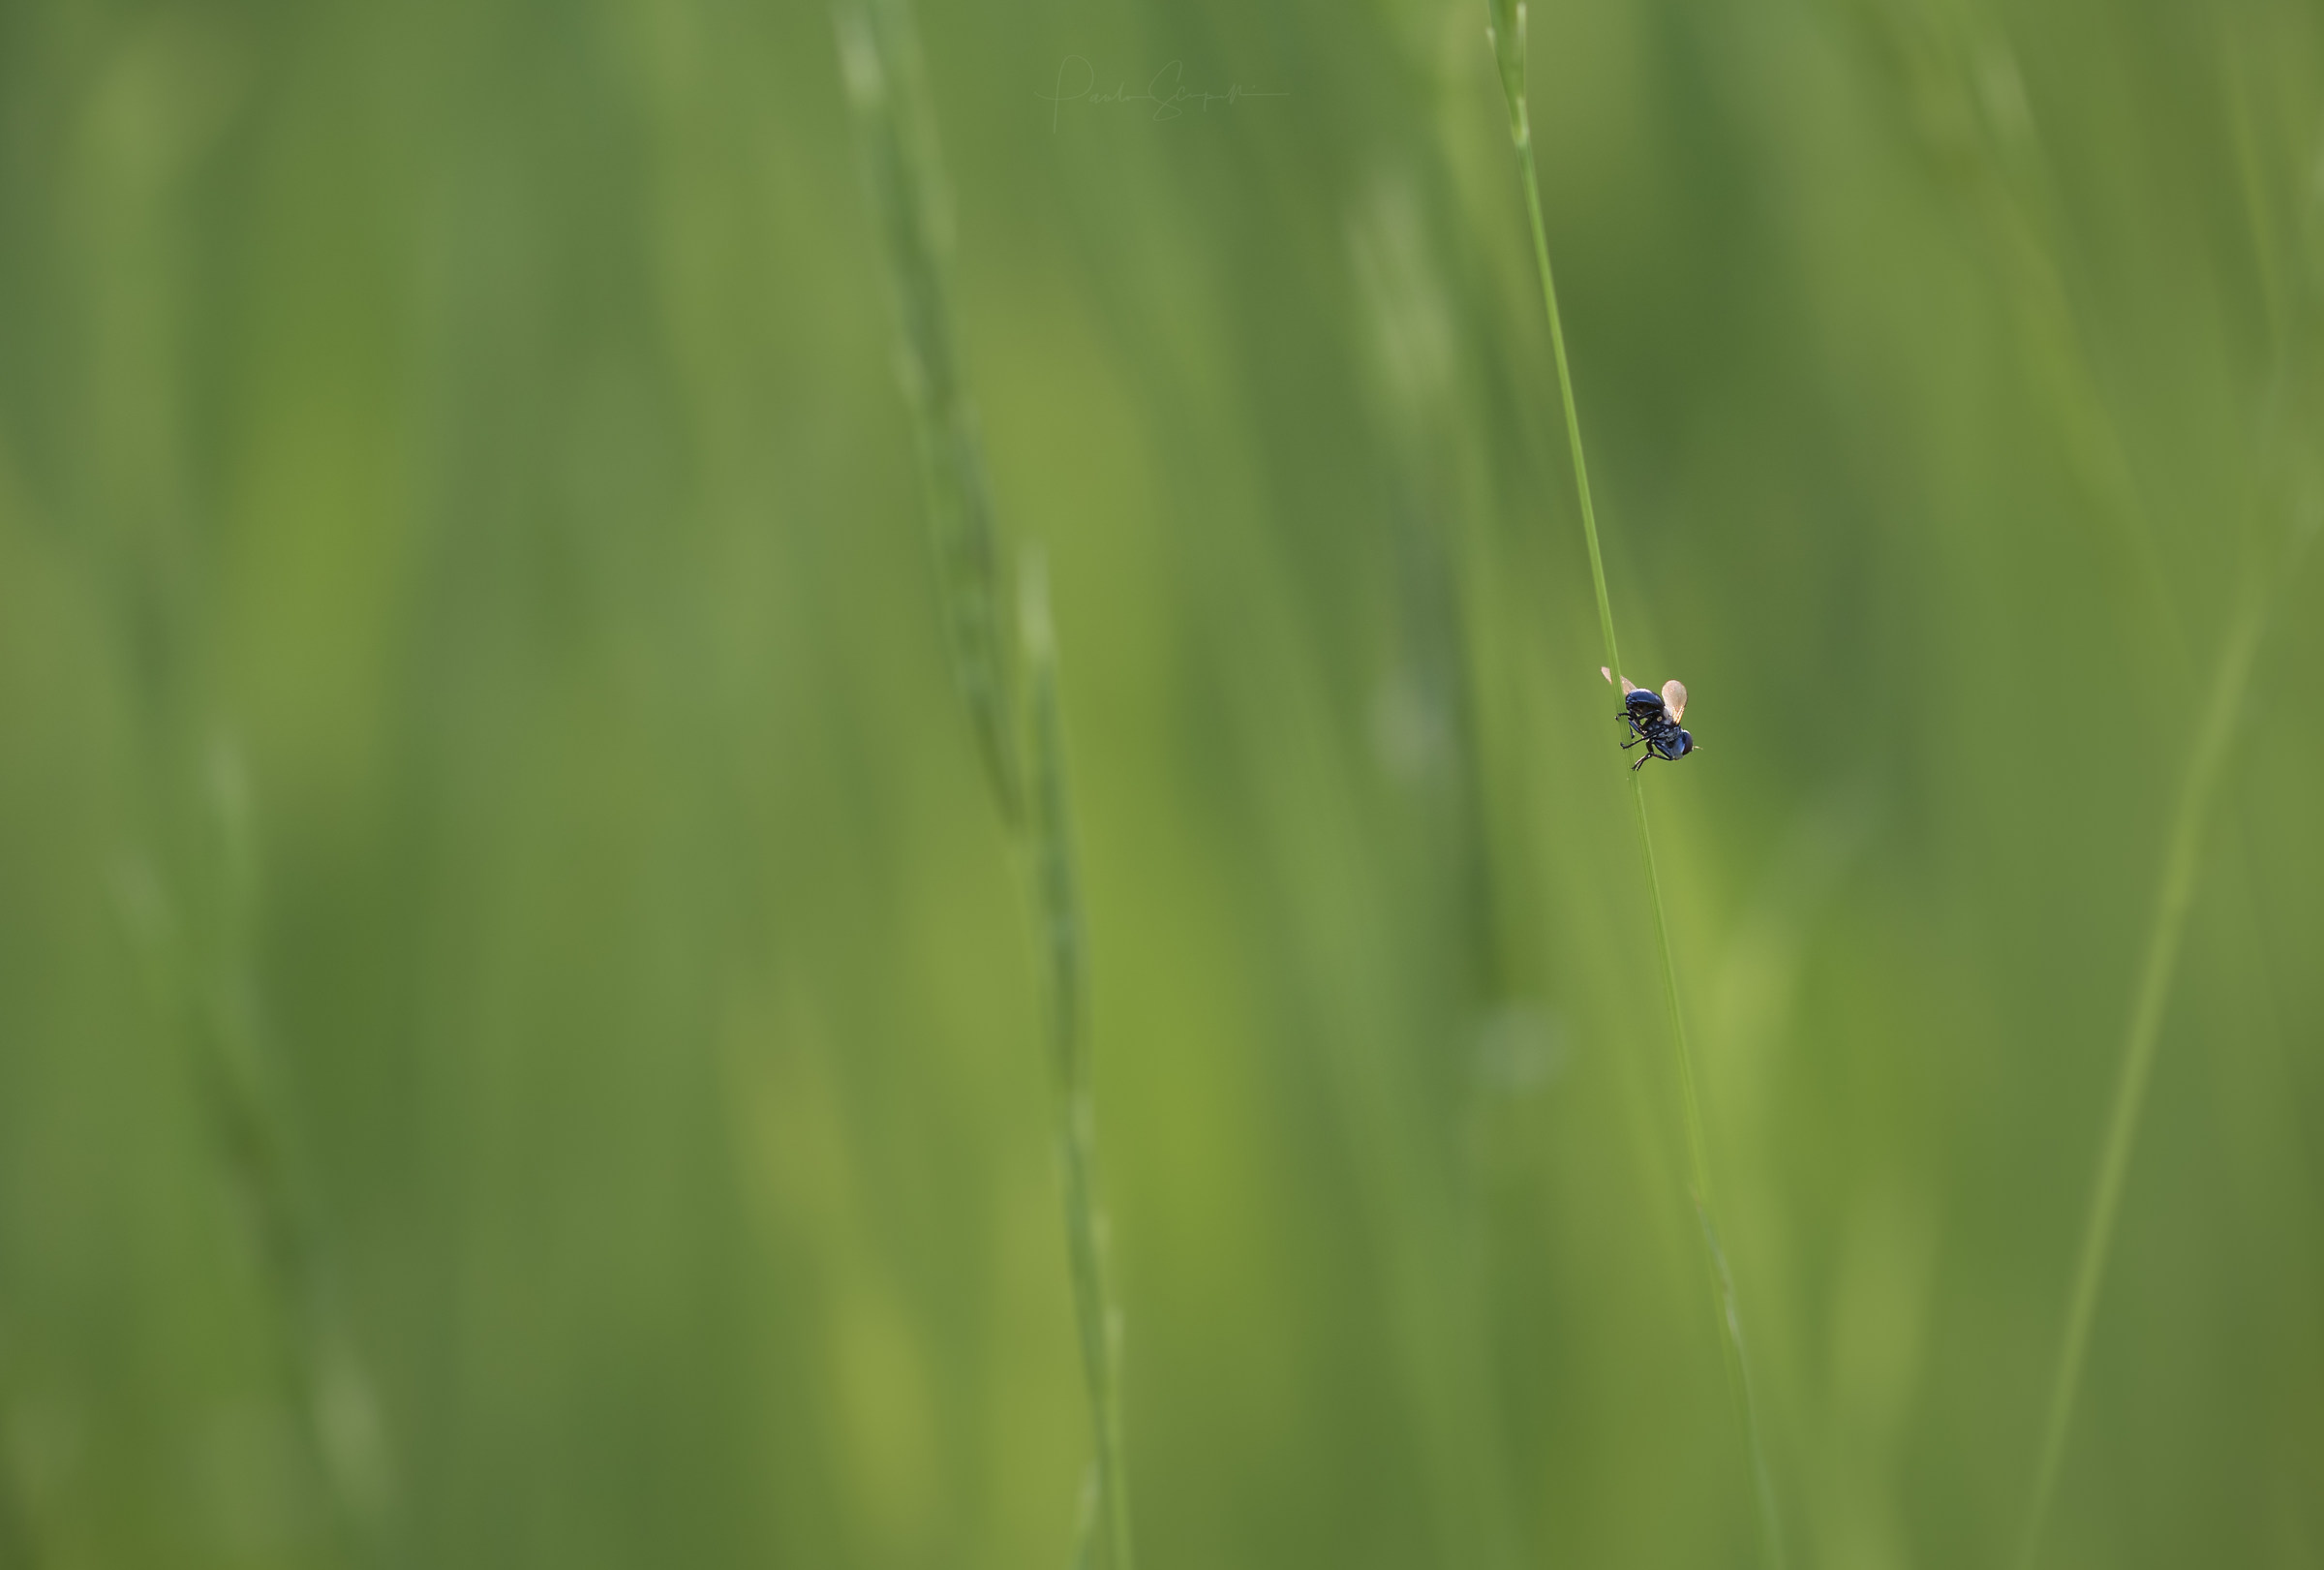 Alone in the grass...